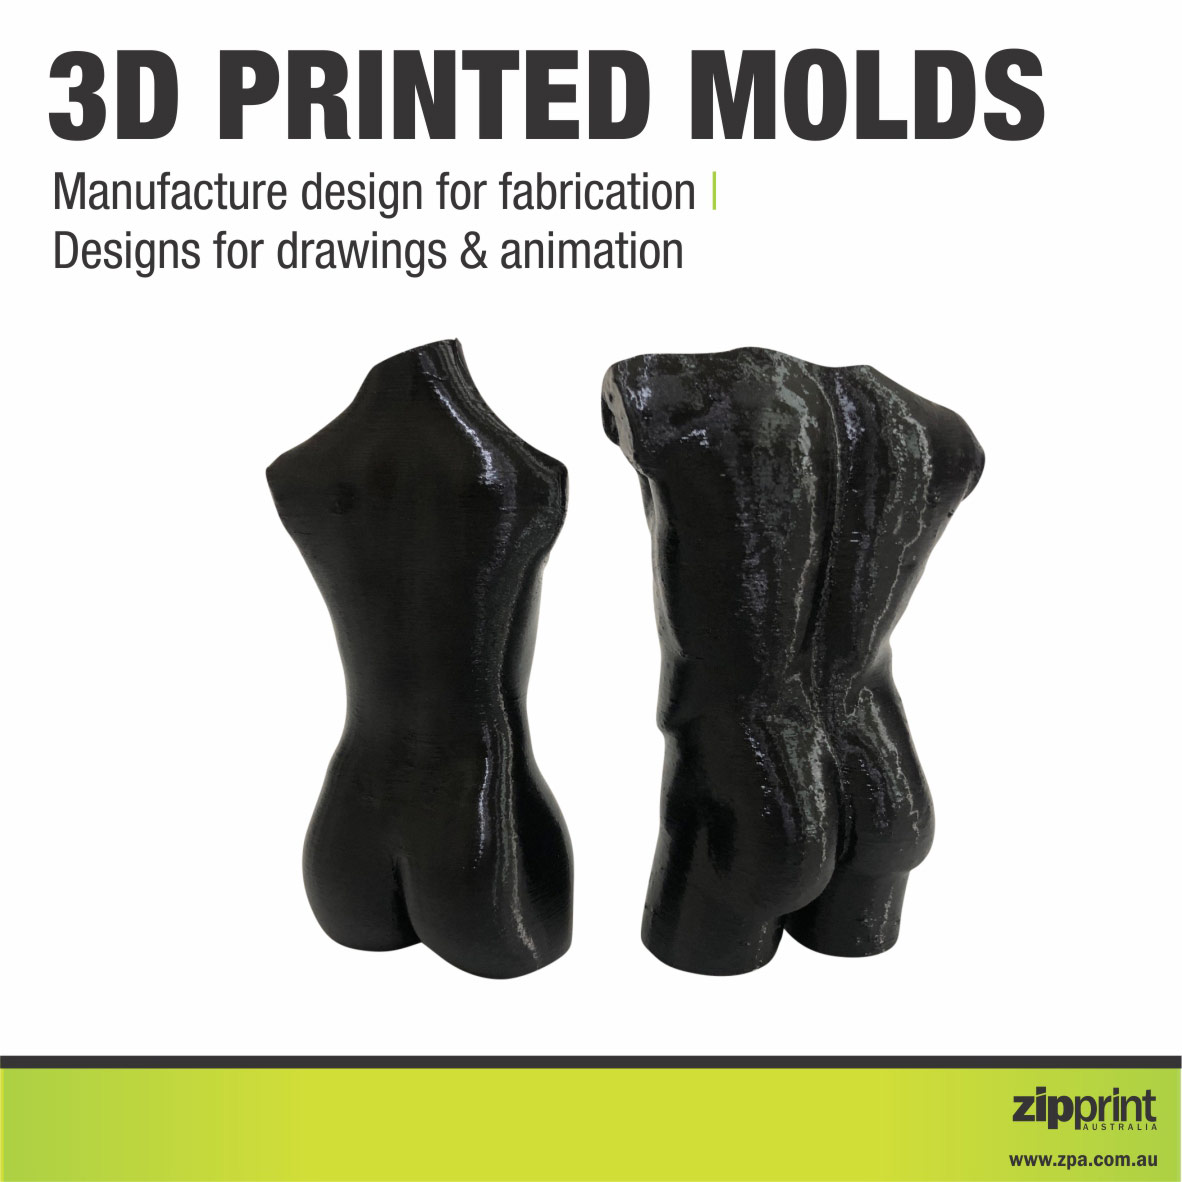 3D Printed Molds